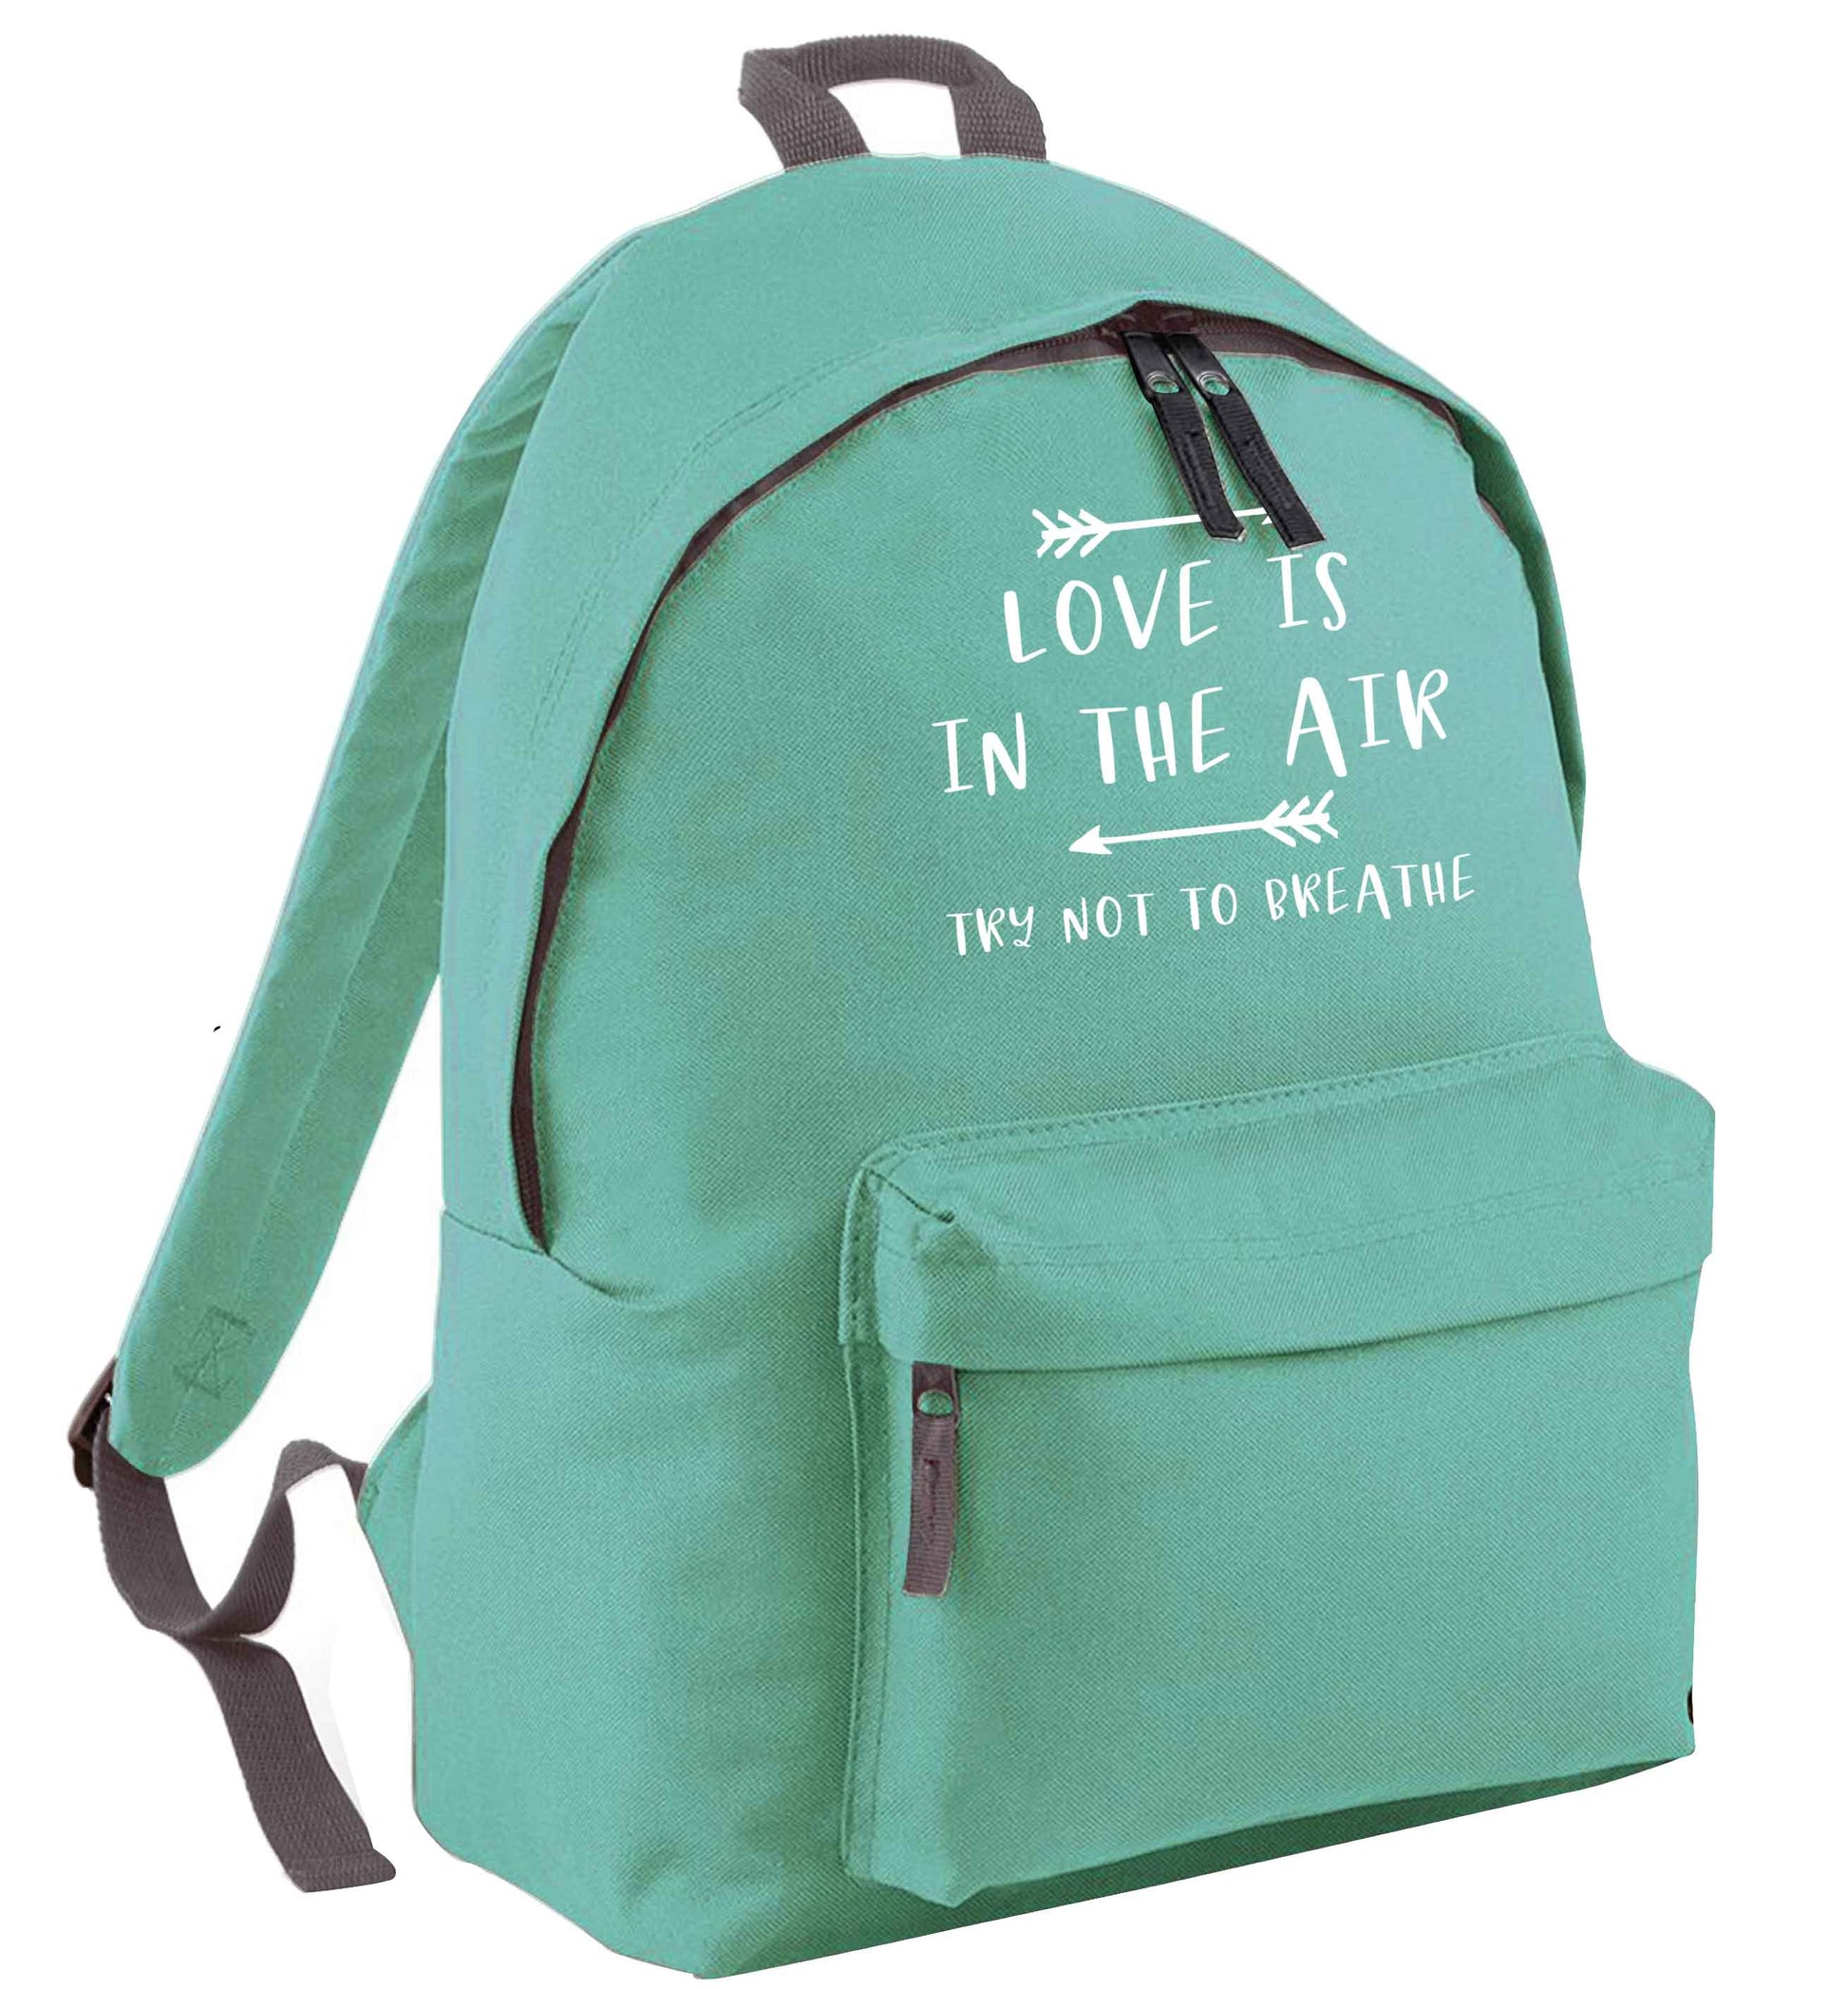 Love is in the air try not to breathe mint adults backpack